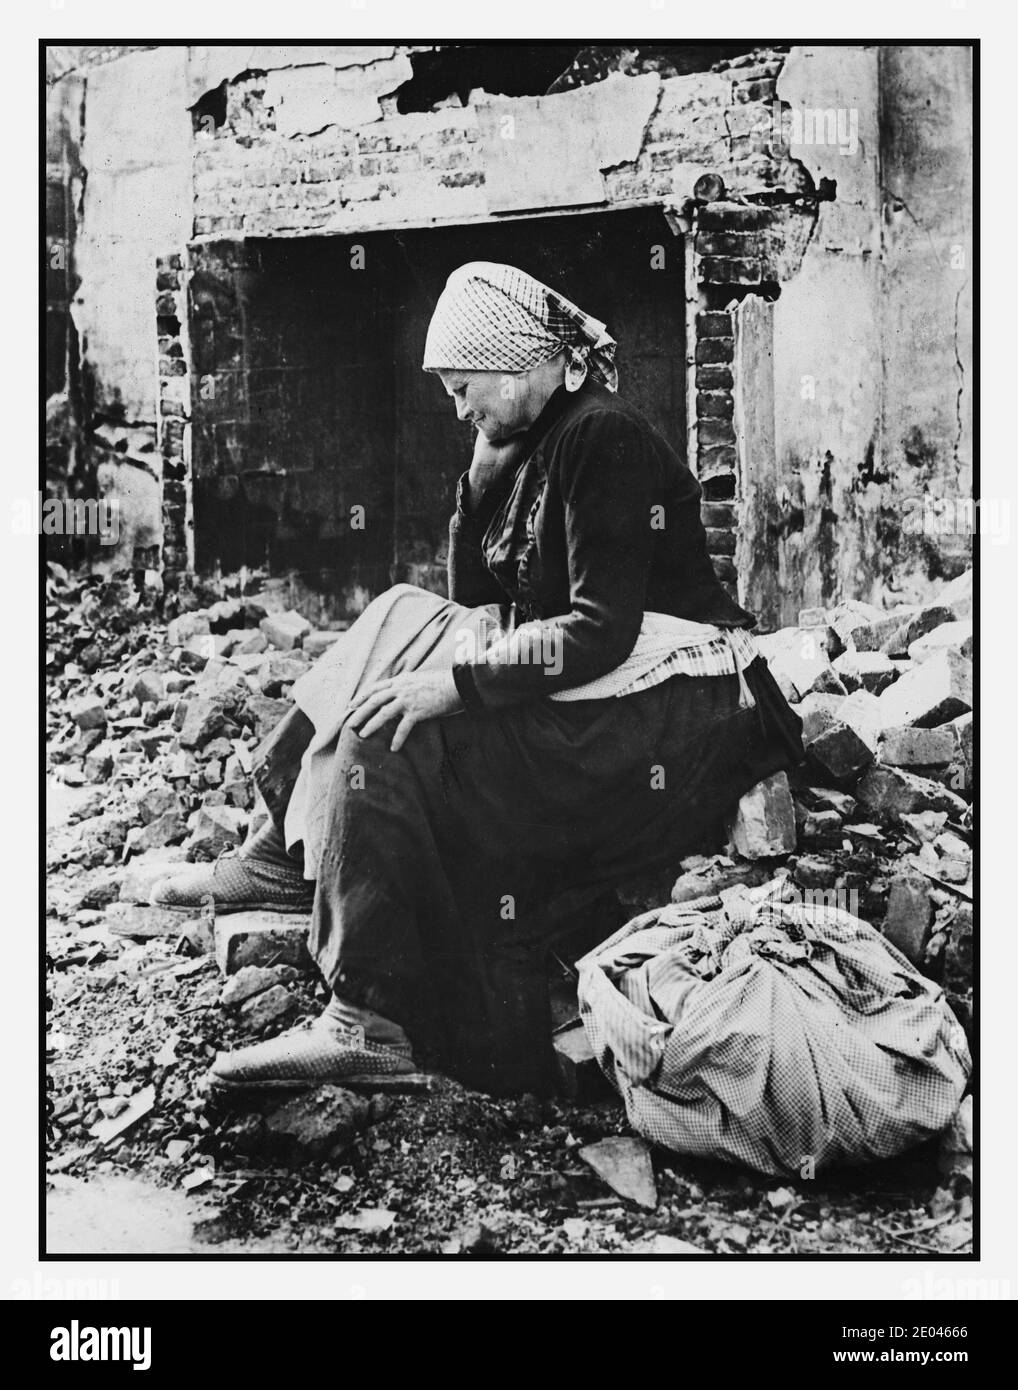 WW1 France German retreat from her district, French woman returns to find her home a heap of ruins elderly homeless French woman, full-length portrait, facing left, seated on the stone rubble of what once was her home in the Somme region of France; also shows a large fireplace in the background. 1917 July. First World War, 1914-1918--Destruction & pillage--France--Somme WW1  War damage--France--Somme--1910-1920 -  Debris--France--Somme--1910-1920 -  Older people--France--Somme--1910-1920 -  Women--Clothing & dress--France--Somme--1910-1920 -  Despair--1910-1920 - Stock Photo